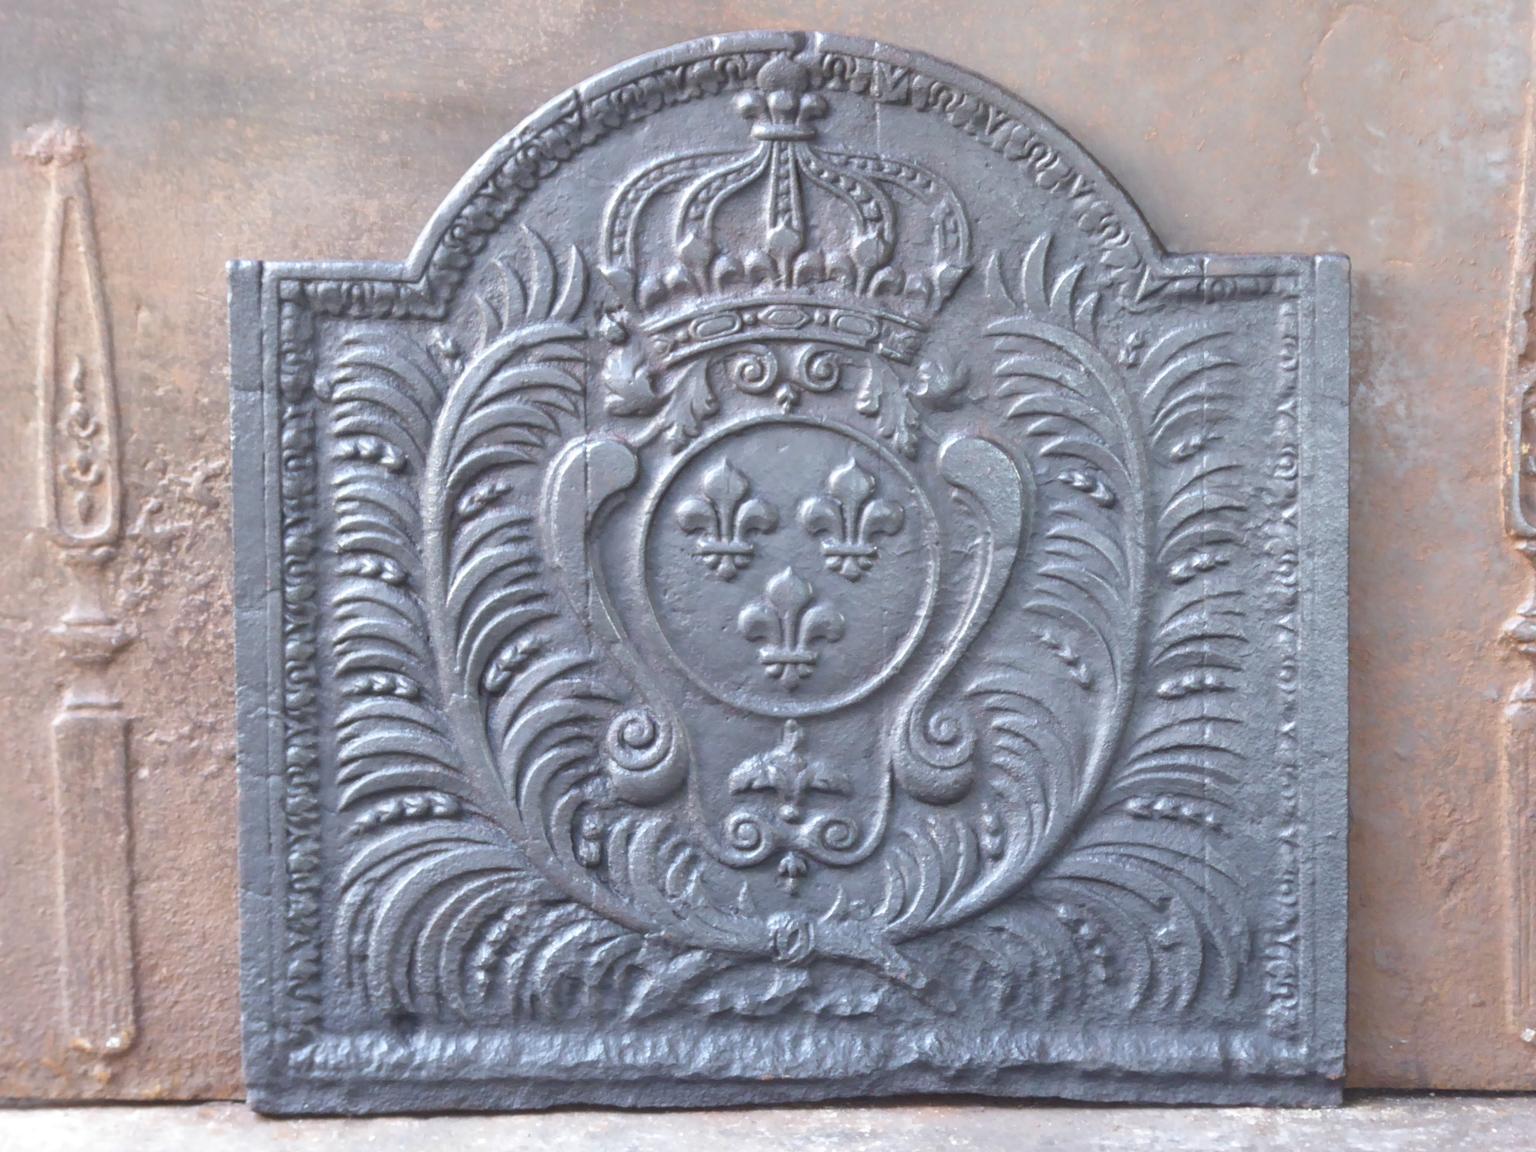 18th-19th century French Louis XV fireback with the arms of France. This is the coat of arms of the House of Bourbon, an originally French royal house that became a major dynasty in Europe. It delivered kings for Spain (Navarra), France, both